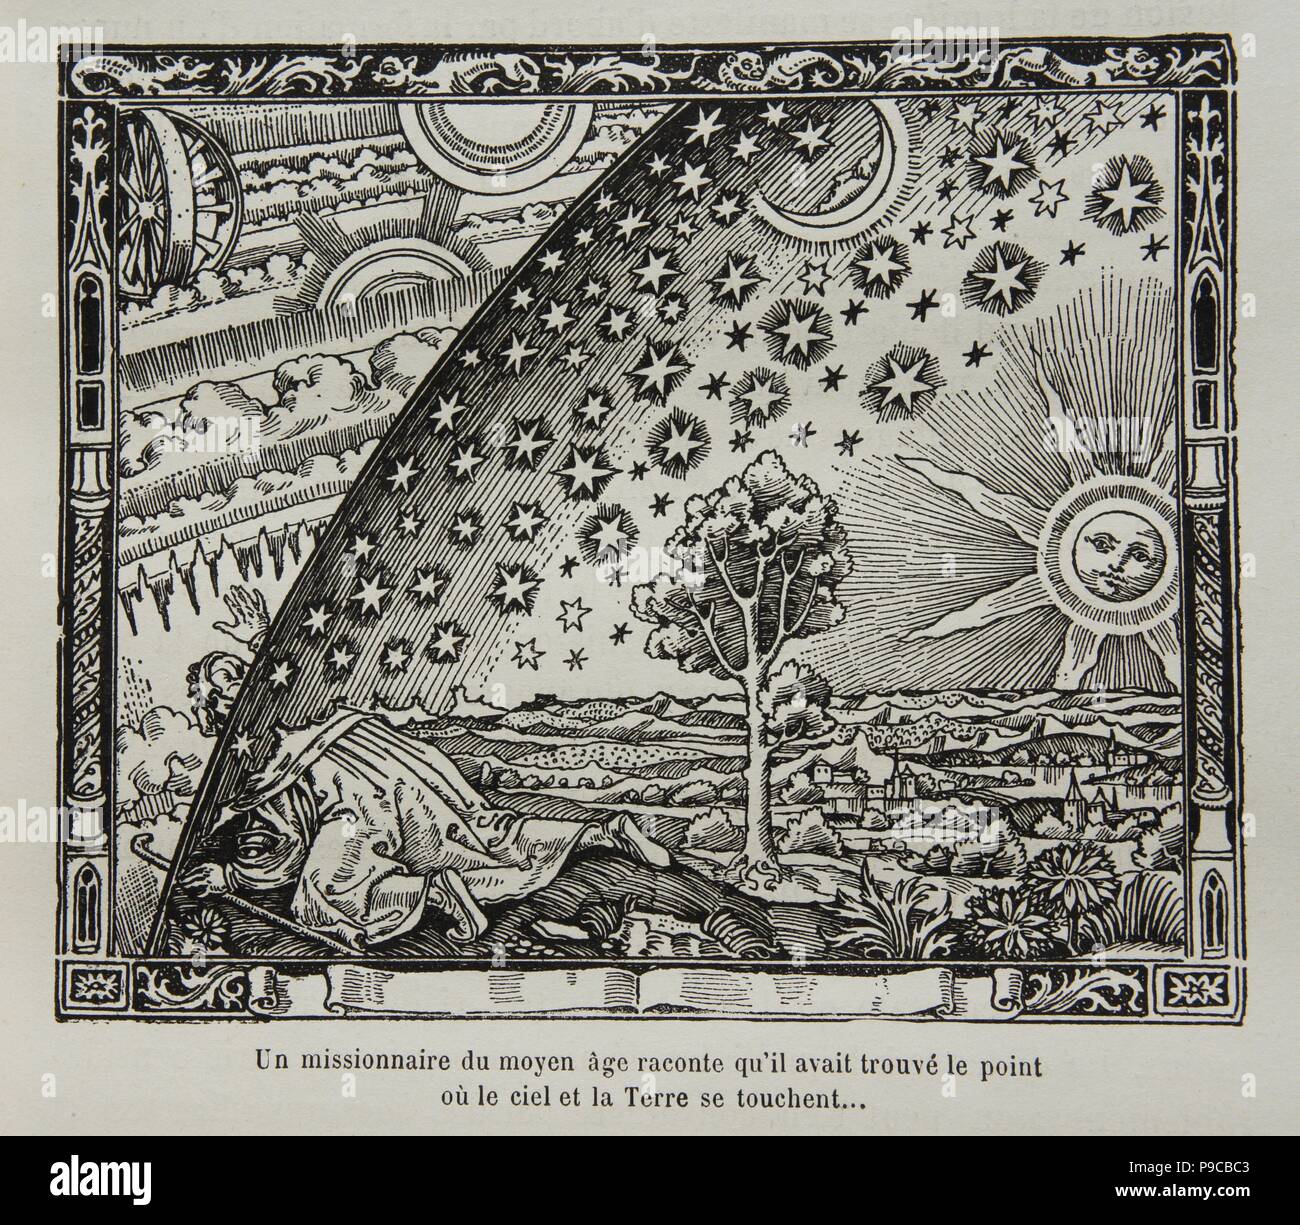 The edge of the firmament (Flammarion engraving) From L'atmosphère. Météorologie populaire by Camille Flammarion. Museum: Zentralbibliothek Zürich. Stock Photo